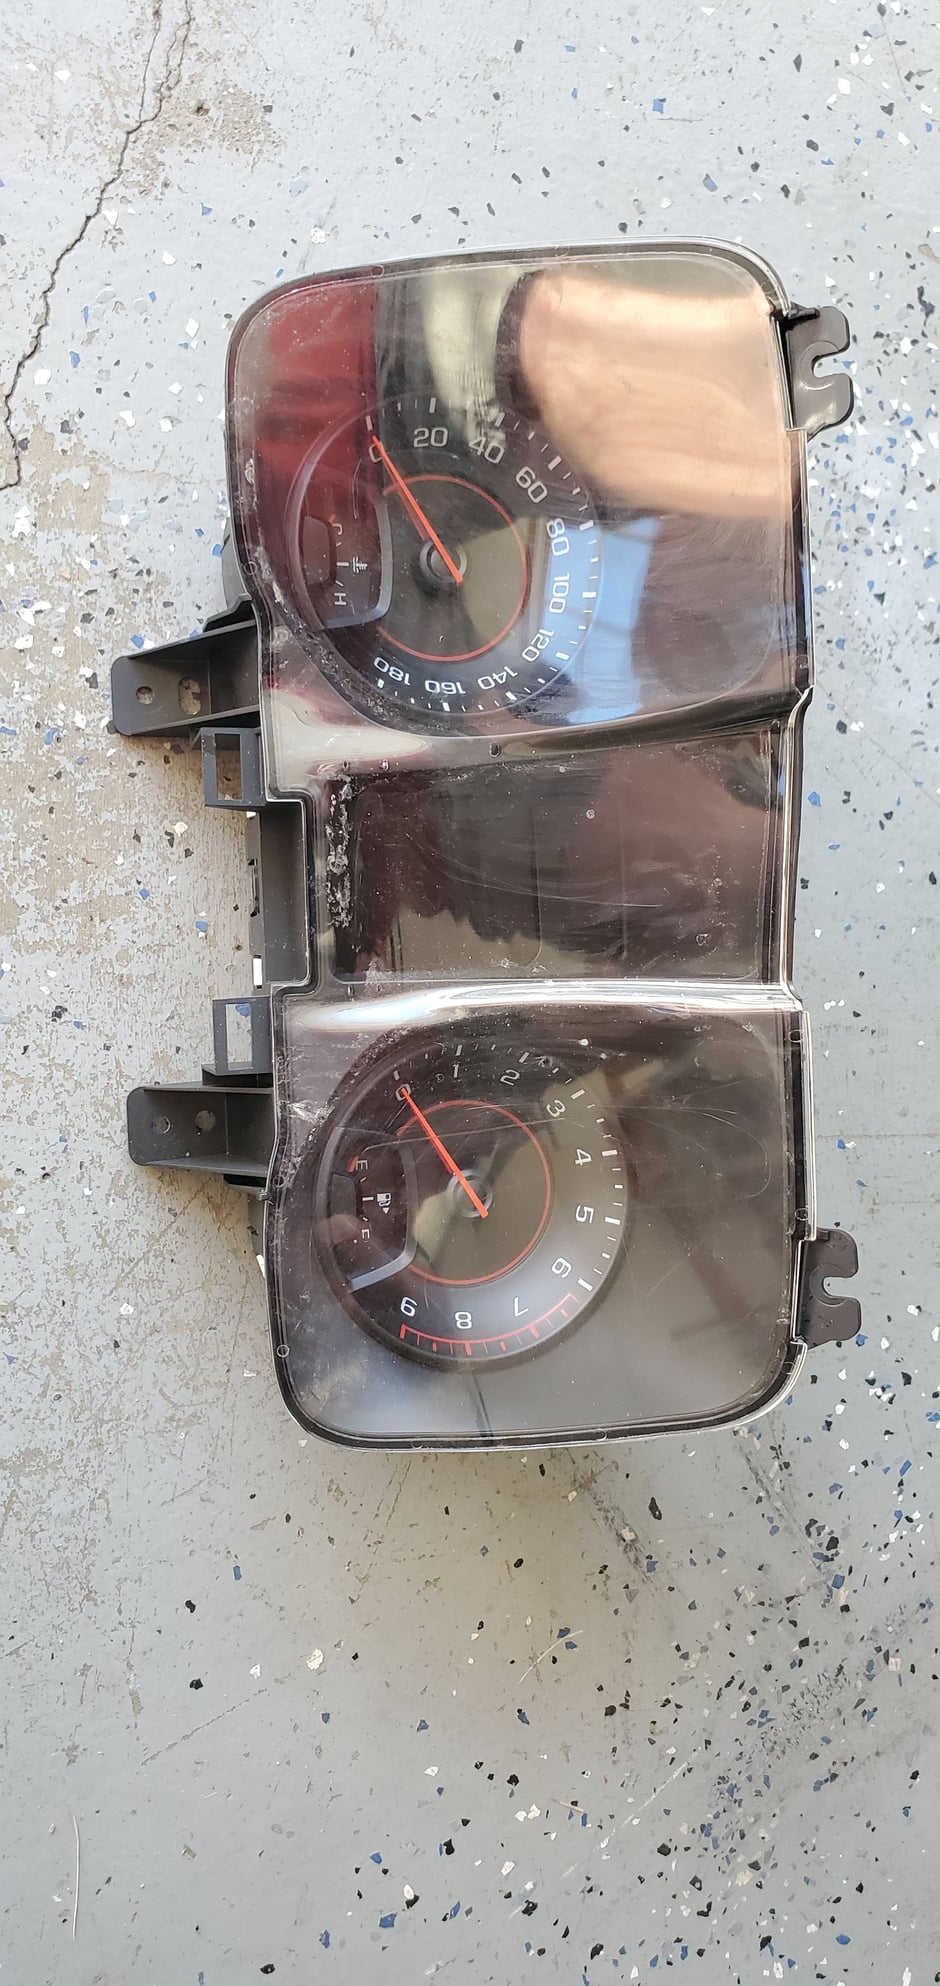 Audio Video/Electronics - 2015 Camaro SS gauge cluster  $50 plus shipping - Used - 2015 Chevrolet Camaro - Connersville, IN 47331, United States